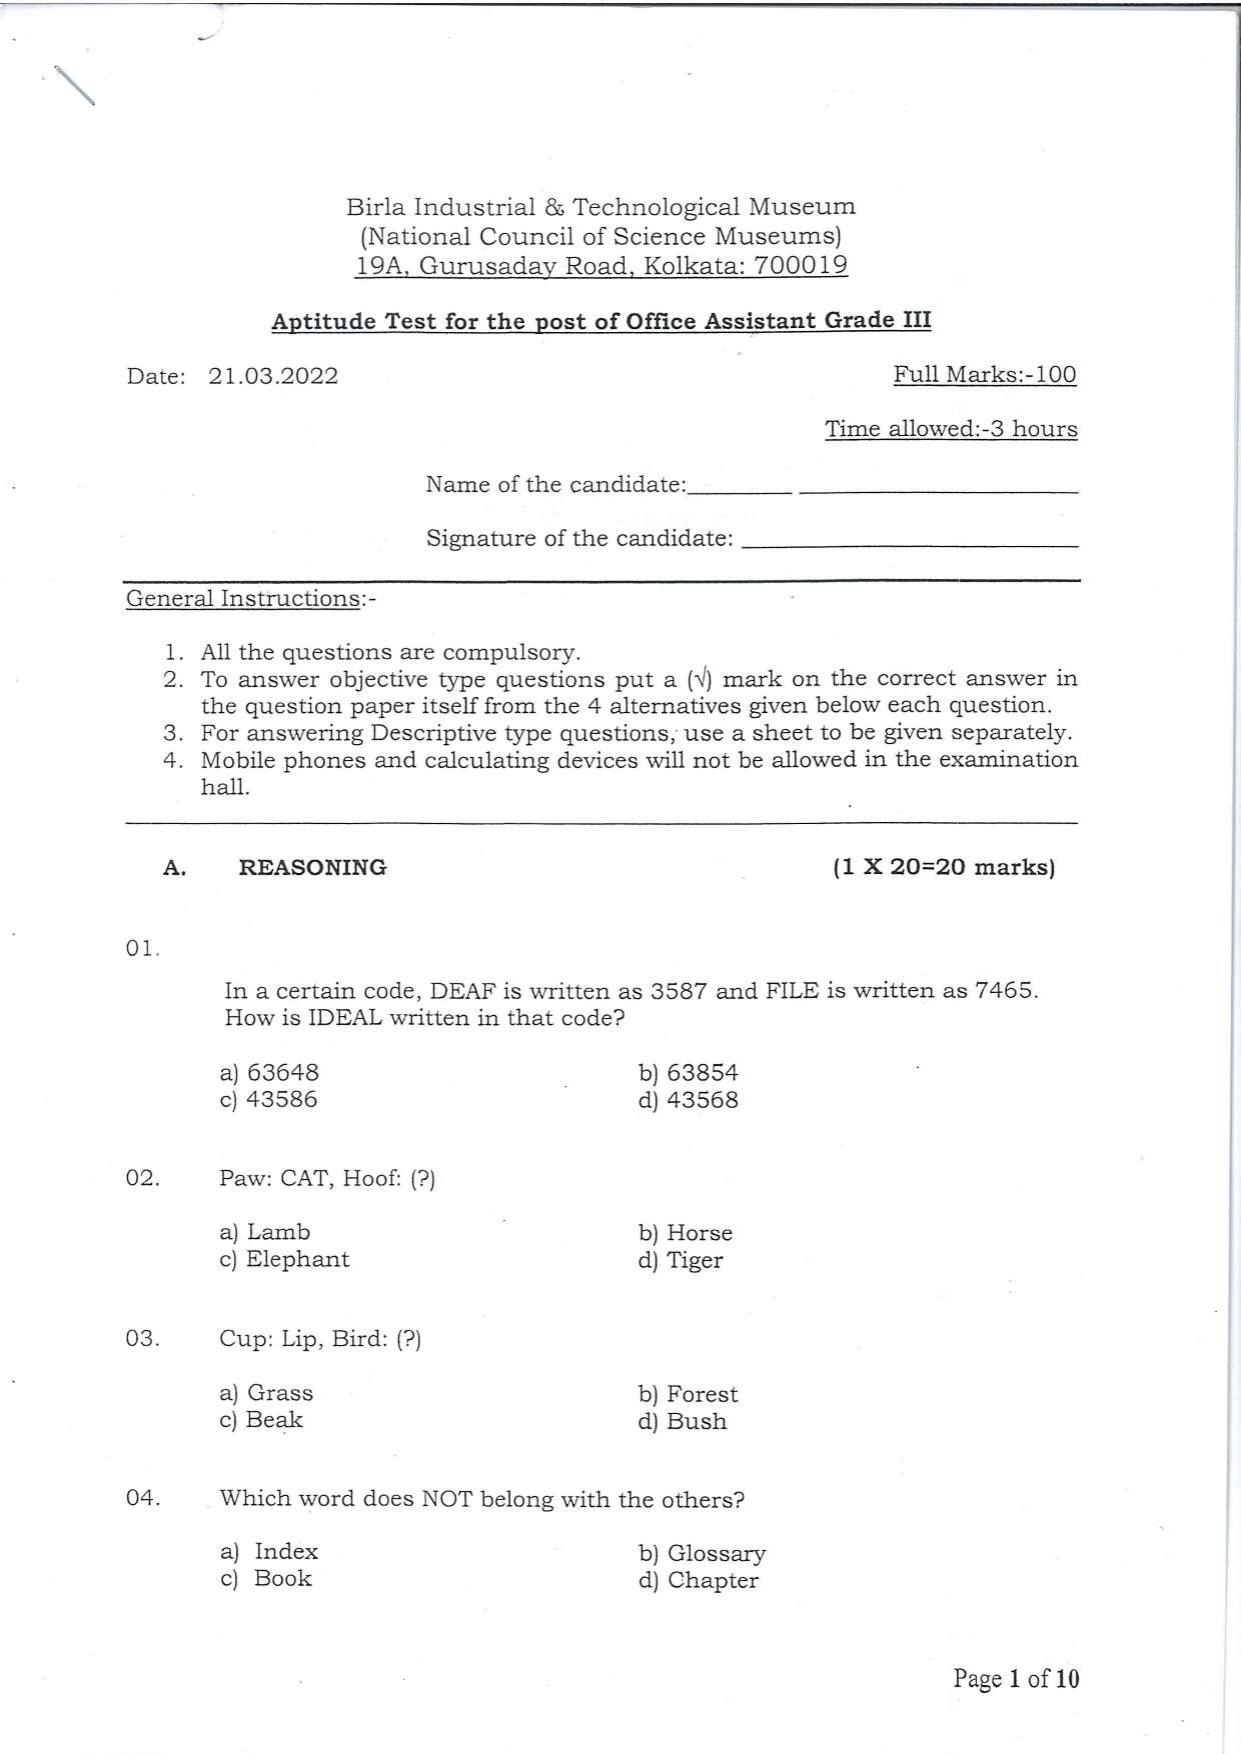 Question Paper of Office Assistant Grade III at BITM, Kolkata and NBSC, Siliguri (Advertisement No. 1/2022) - Page 1